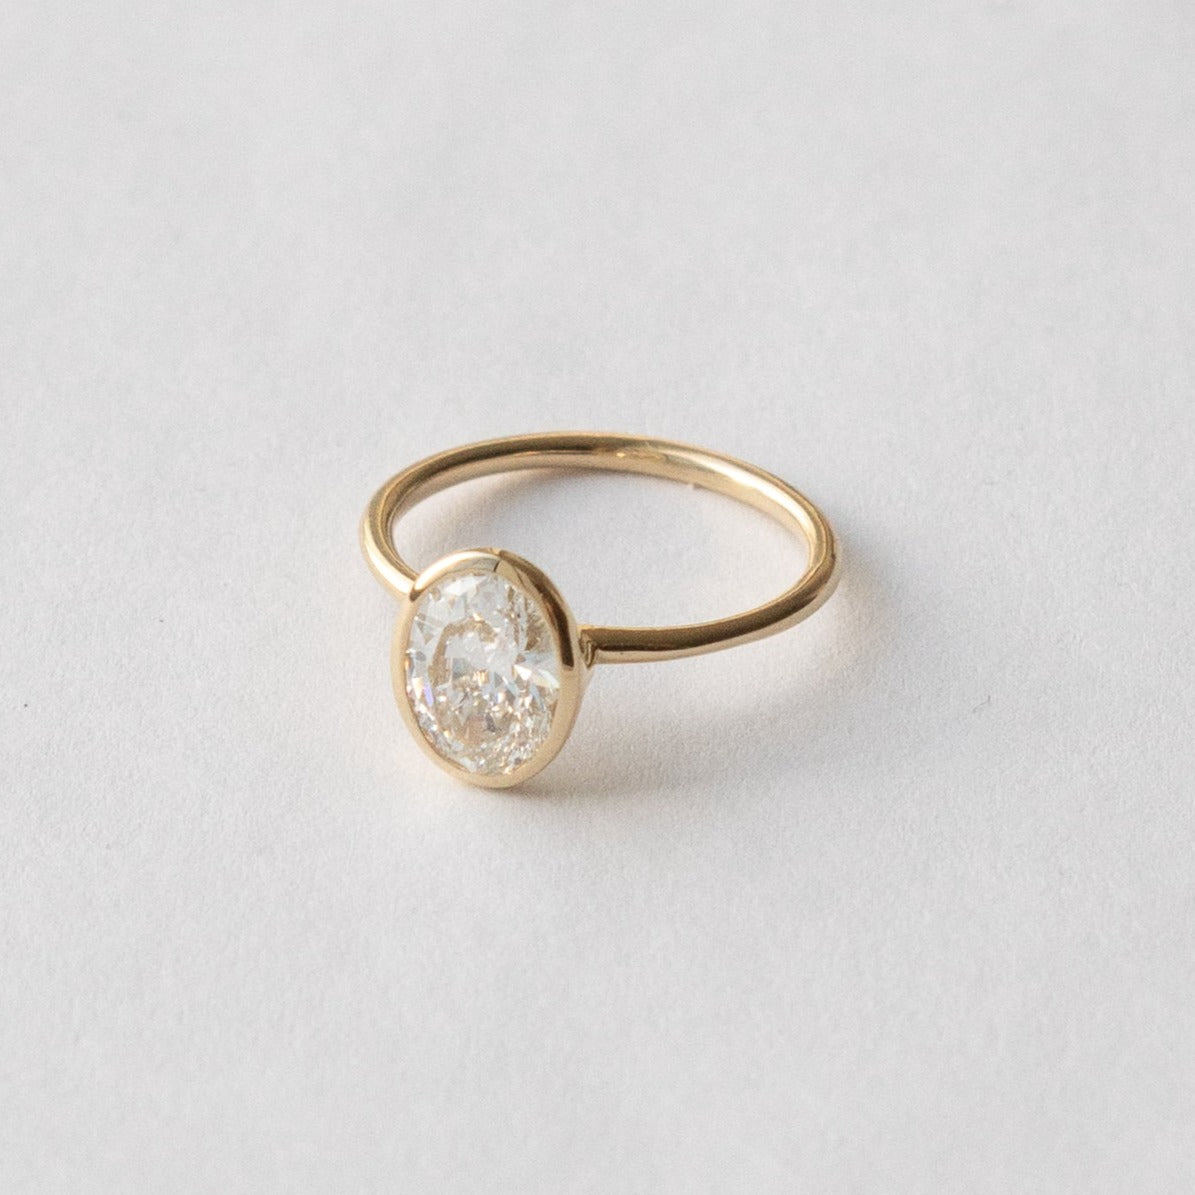 Artu Unique Ring in 14k Gold set with 1.51ct oval cut lab-grown diamond By SHW Fine Jewelry New York City